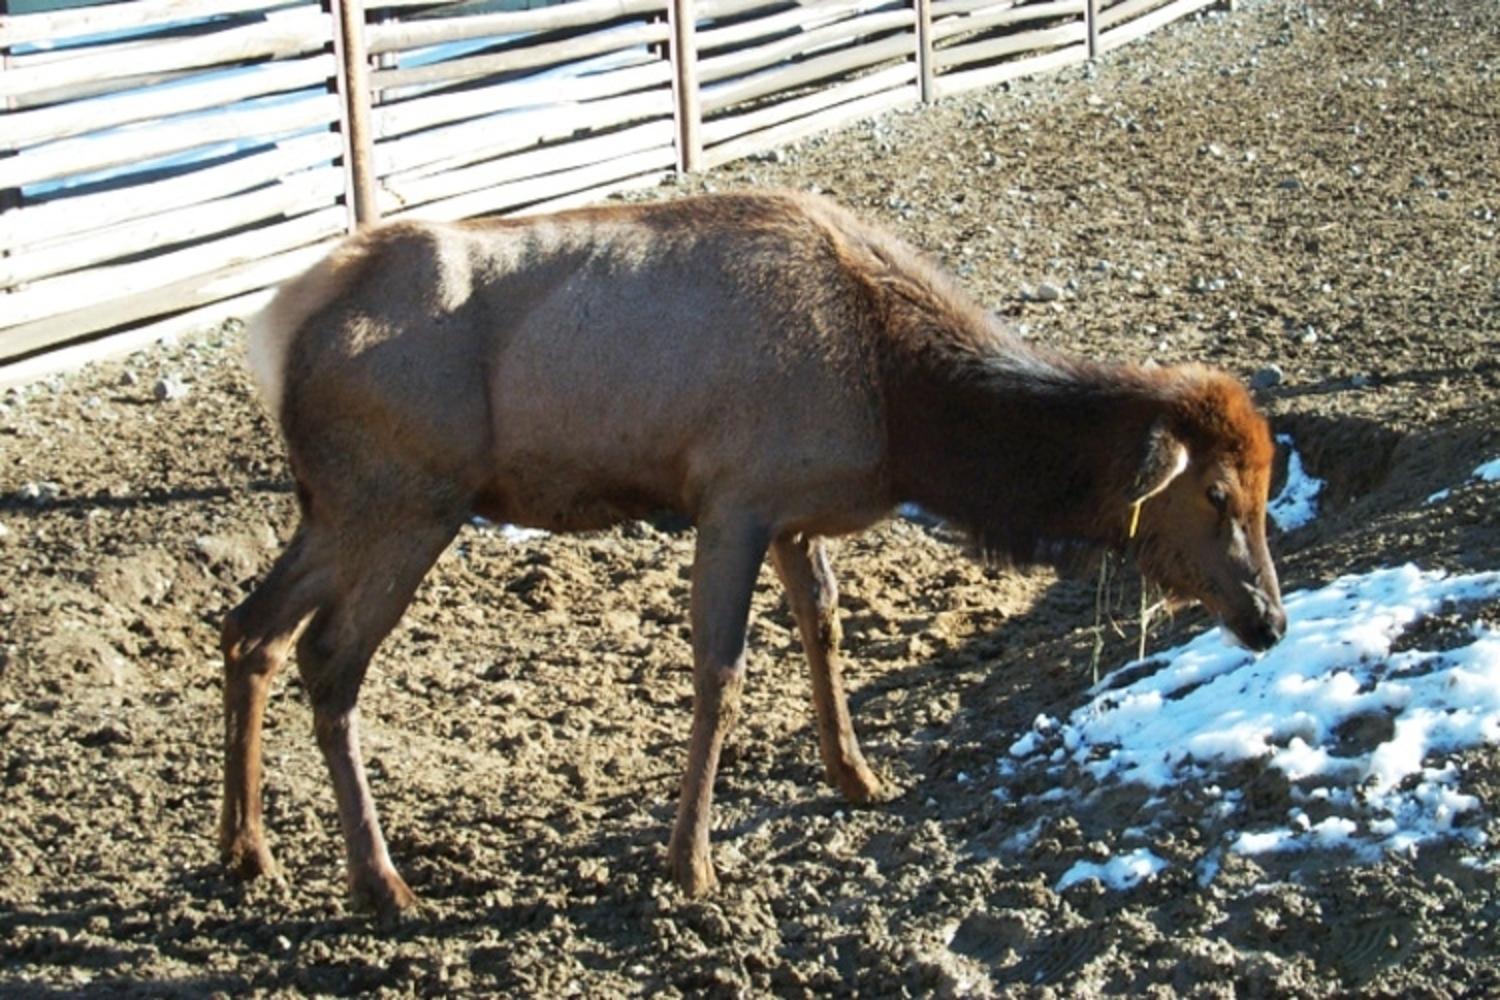 A sick and doomed elk infected with CWD, part of a study conducted by disease researchers in Wyoming. Photo courtesy Wyoming Game and Fish Department